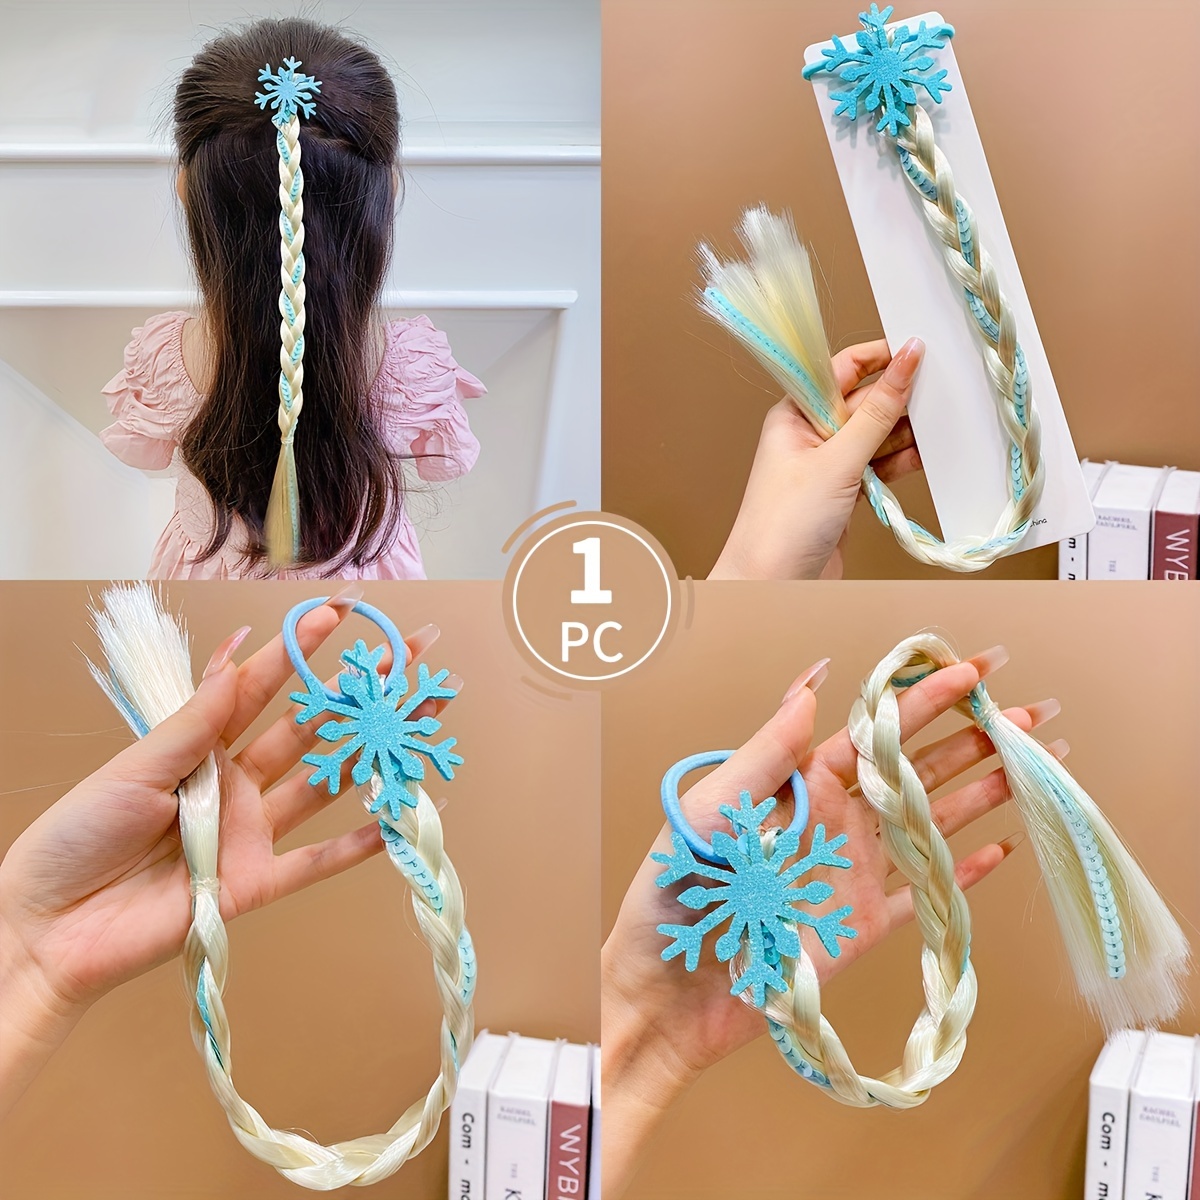 1pc Kids' Braided Hair Clip With Twisted Braid Design And Cartoon  Characters, Colored Princess Braiding Hair Accessory